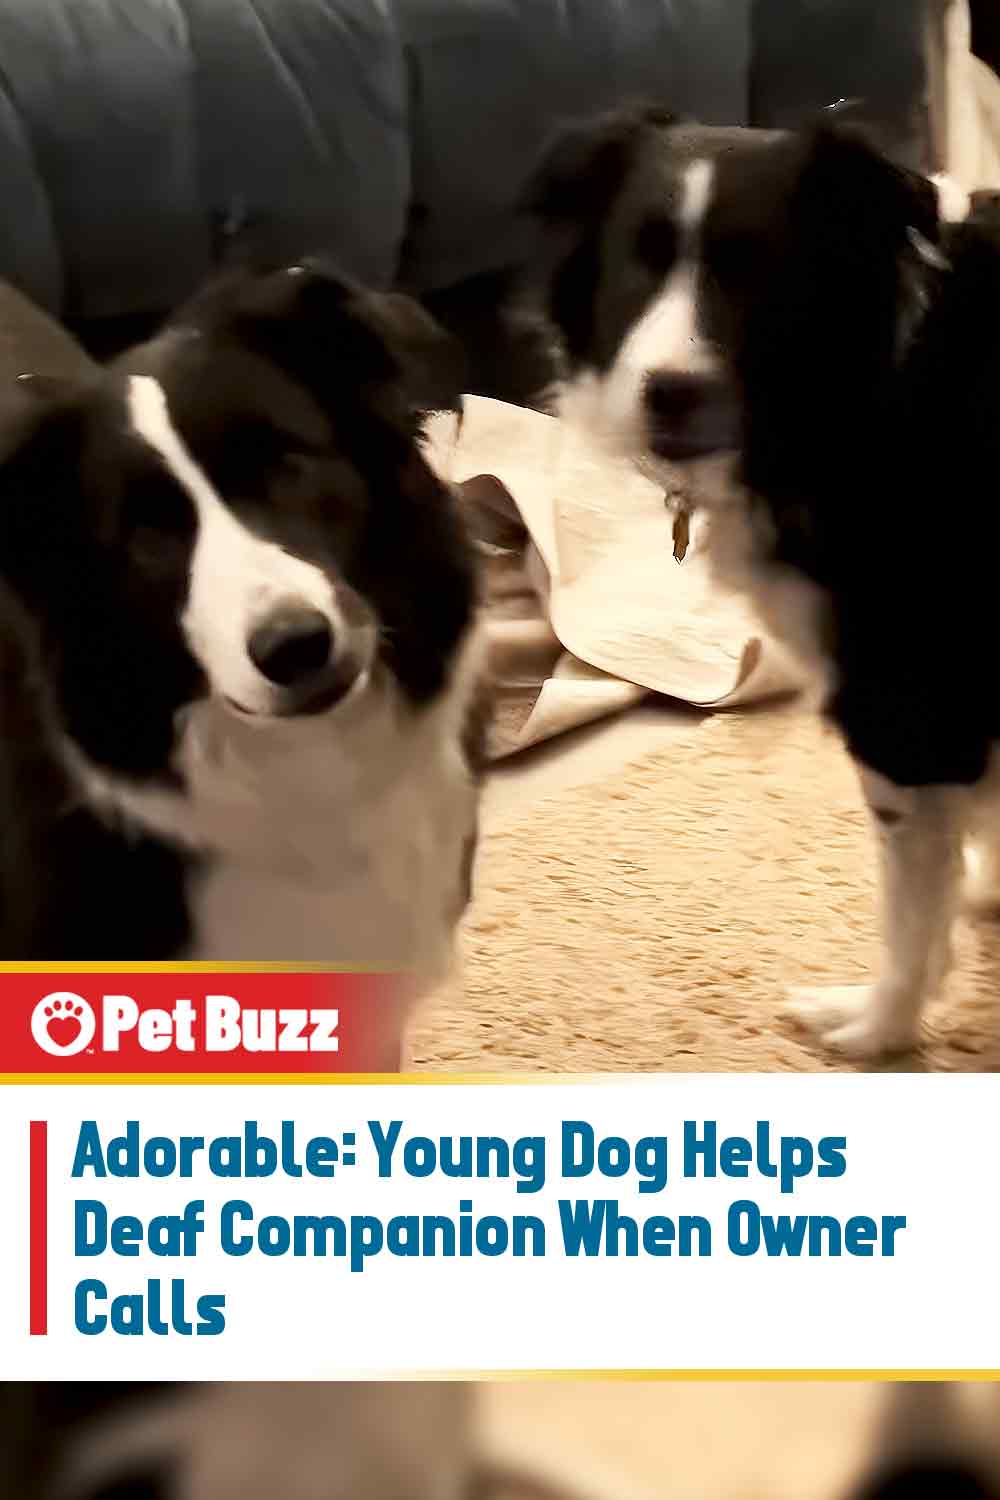 Adorable: Young Dog Helps Deaf Companion When Owner Calls